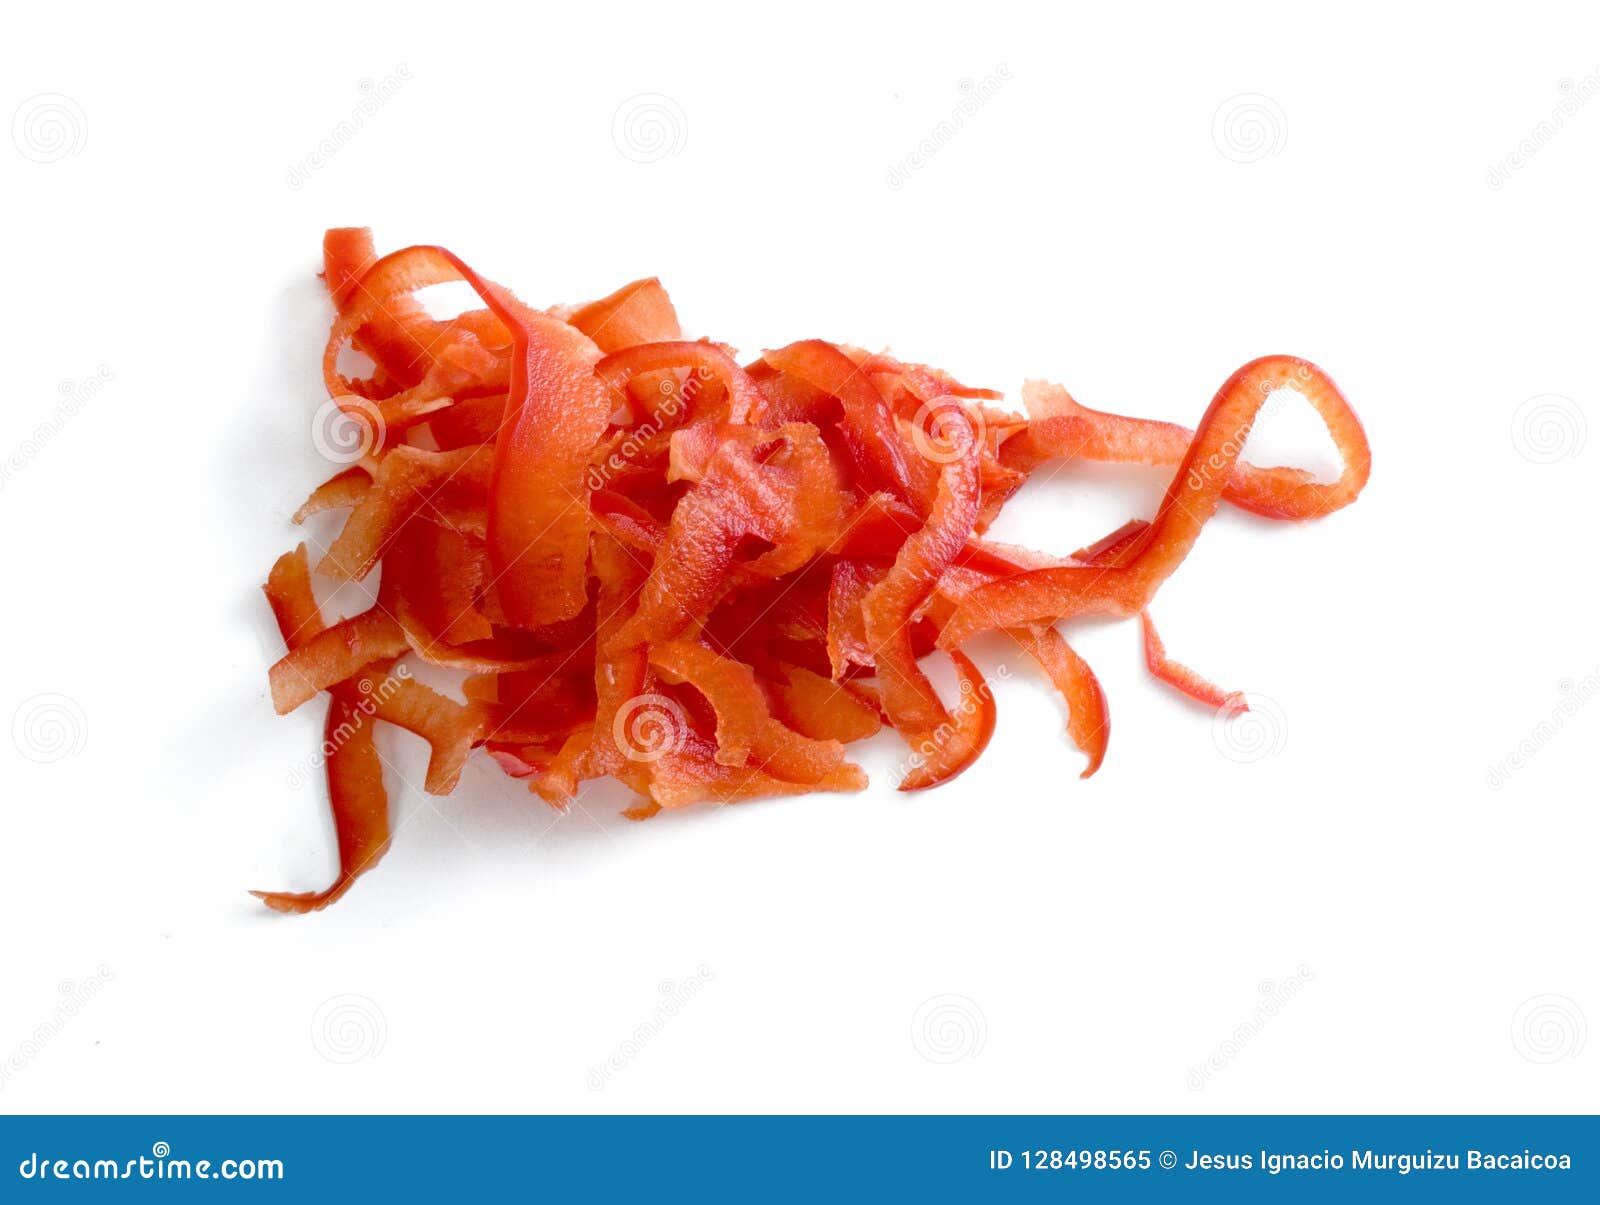 aerial view of julienne cuts of red pepper